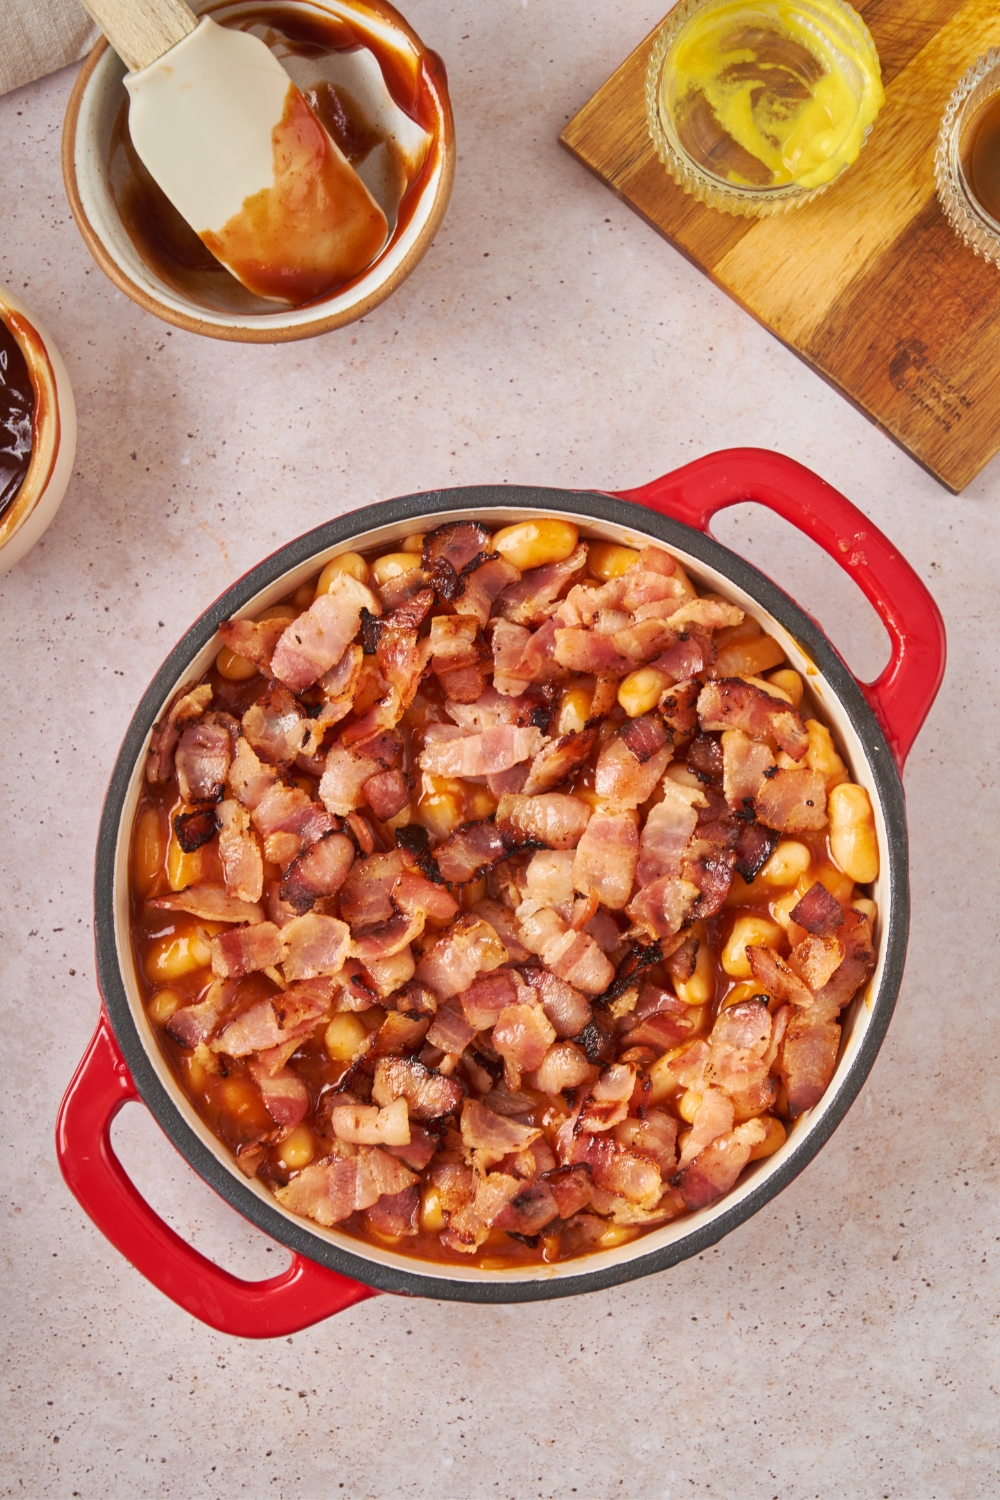 Cooked bacon on top of baked beans in a round baking dish.